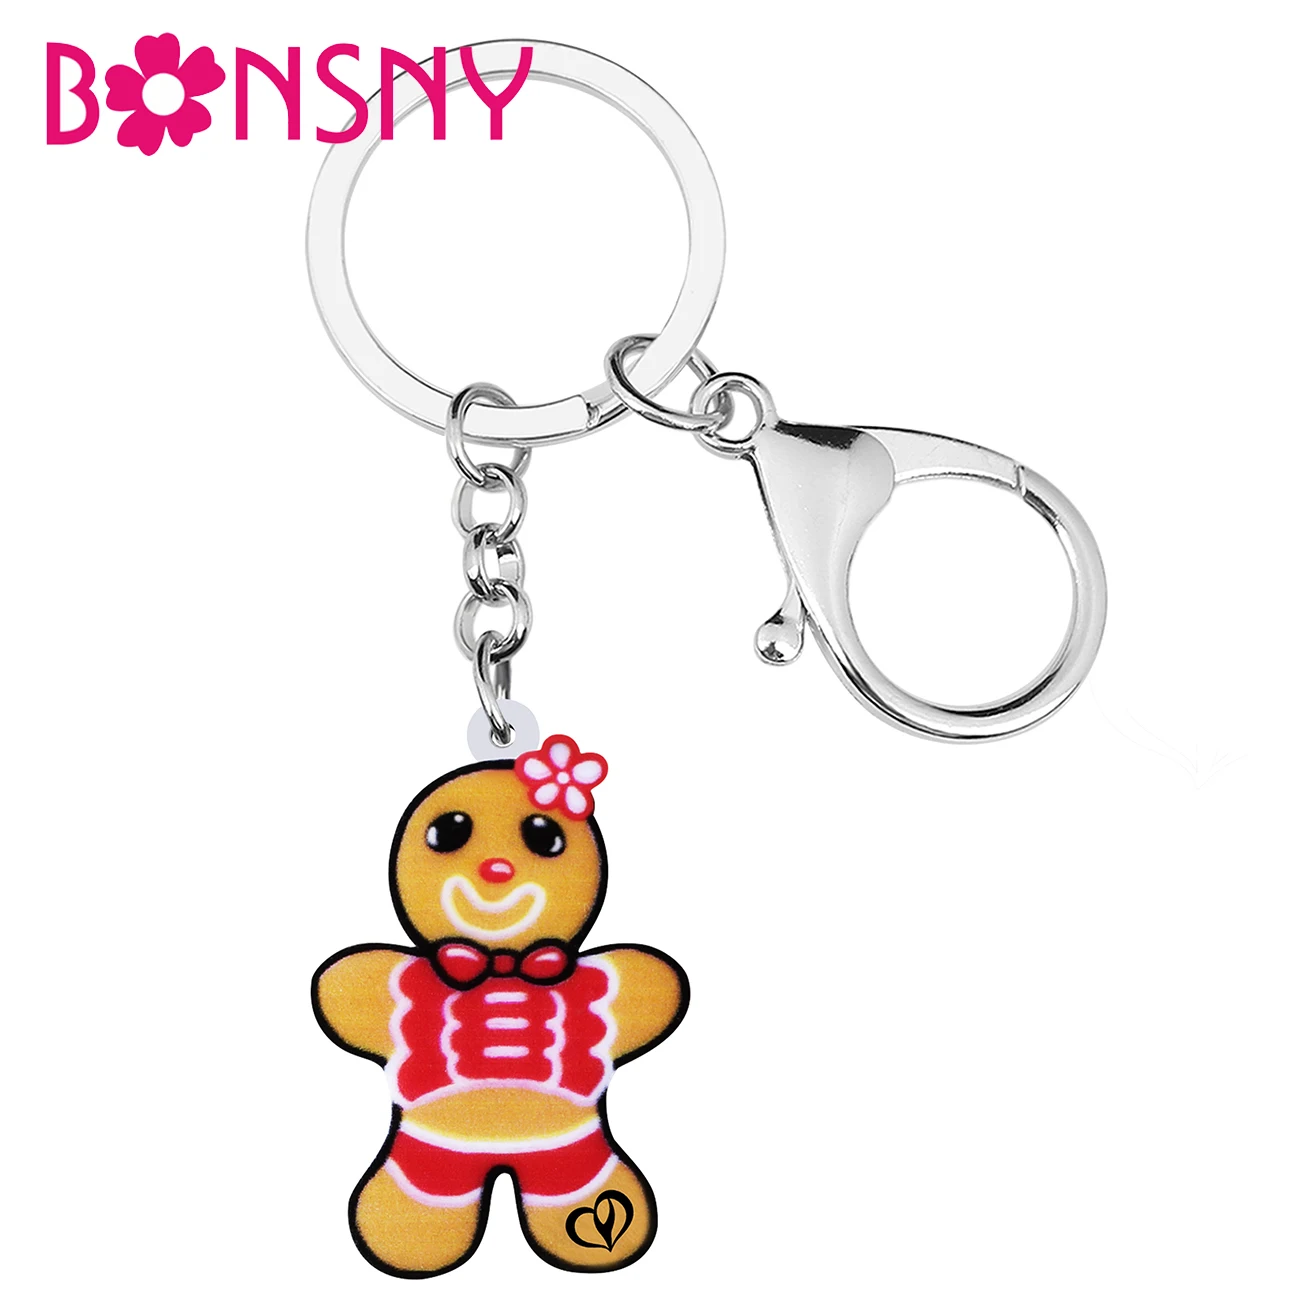 

BONSNY Acrylic Cute Vintage Christmas Gingerbread Man Keychains Fashion Car Key Chain Ring Jewelry For Women Teen Charms Gifts